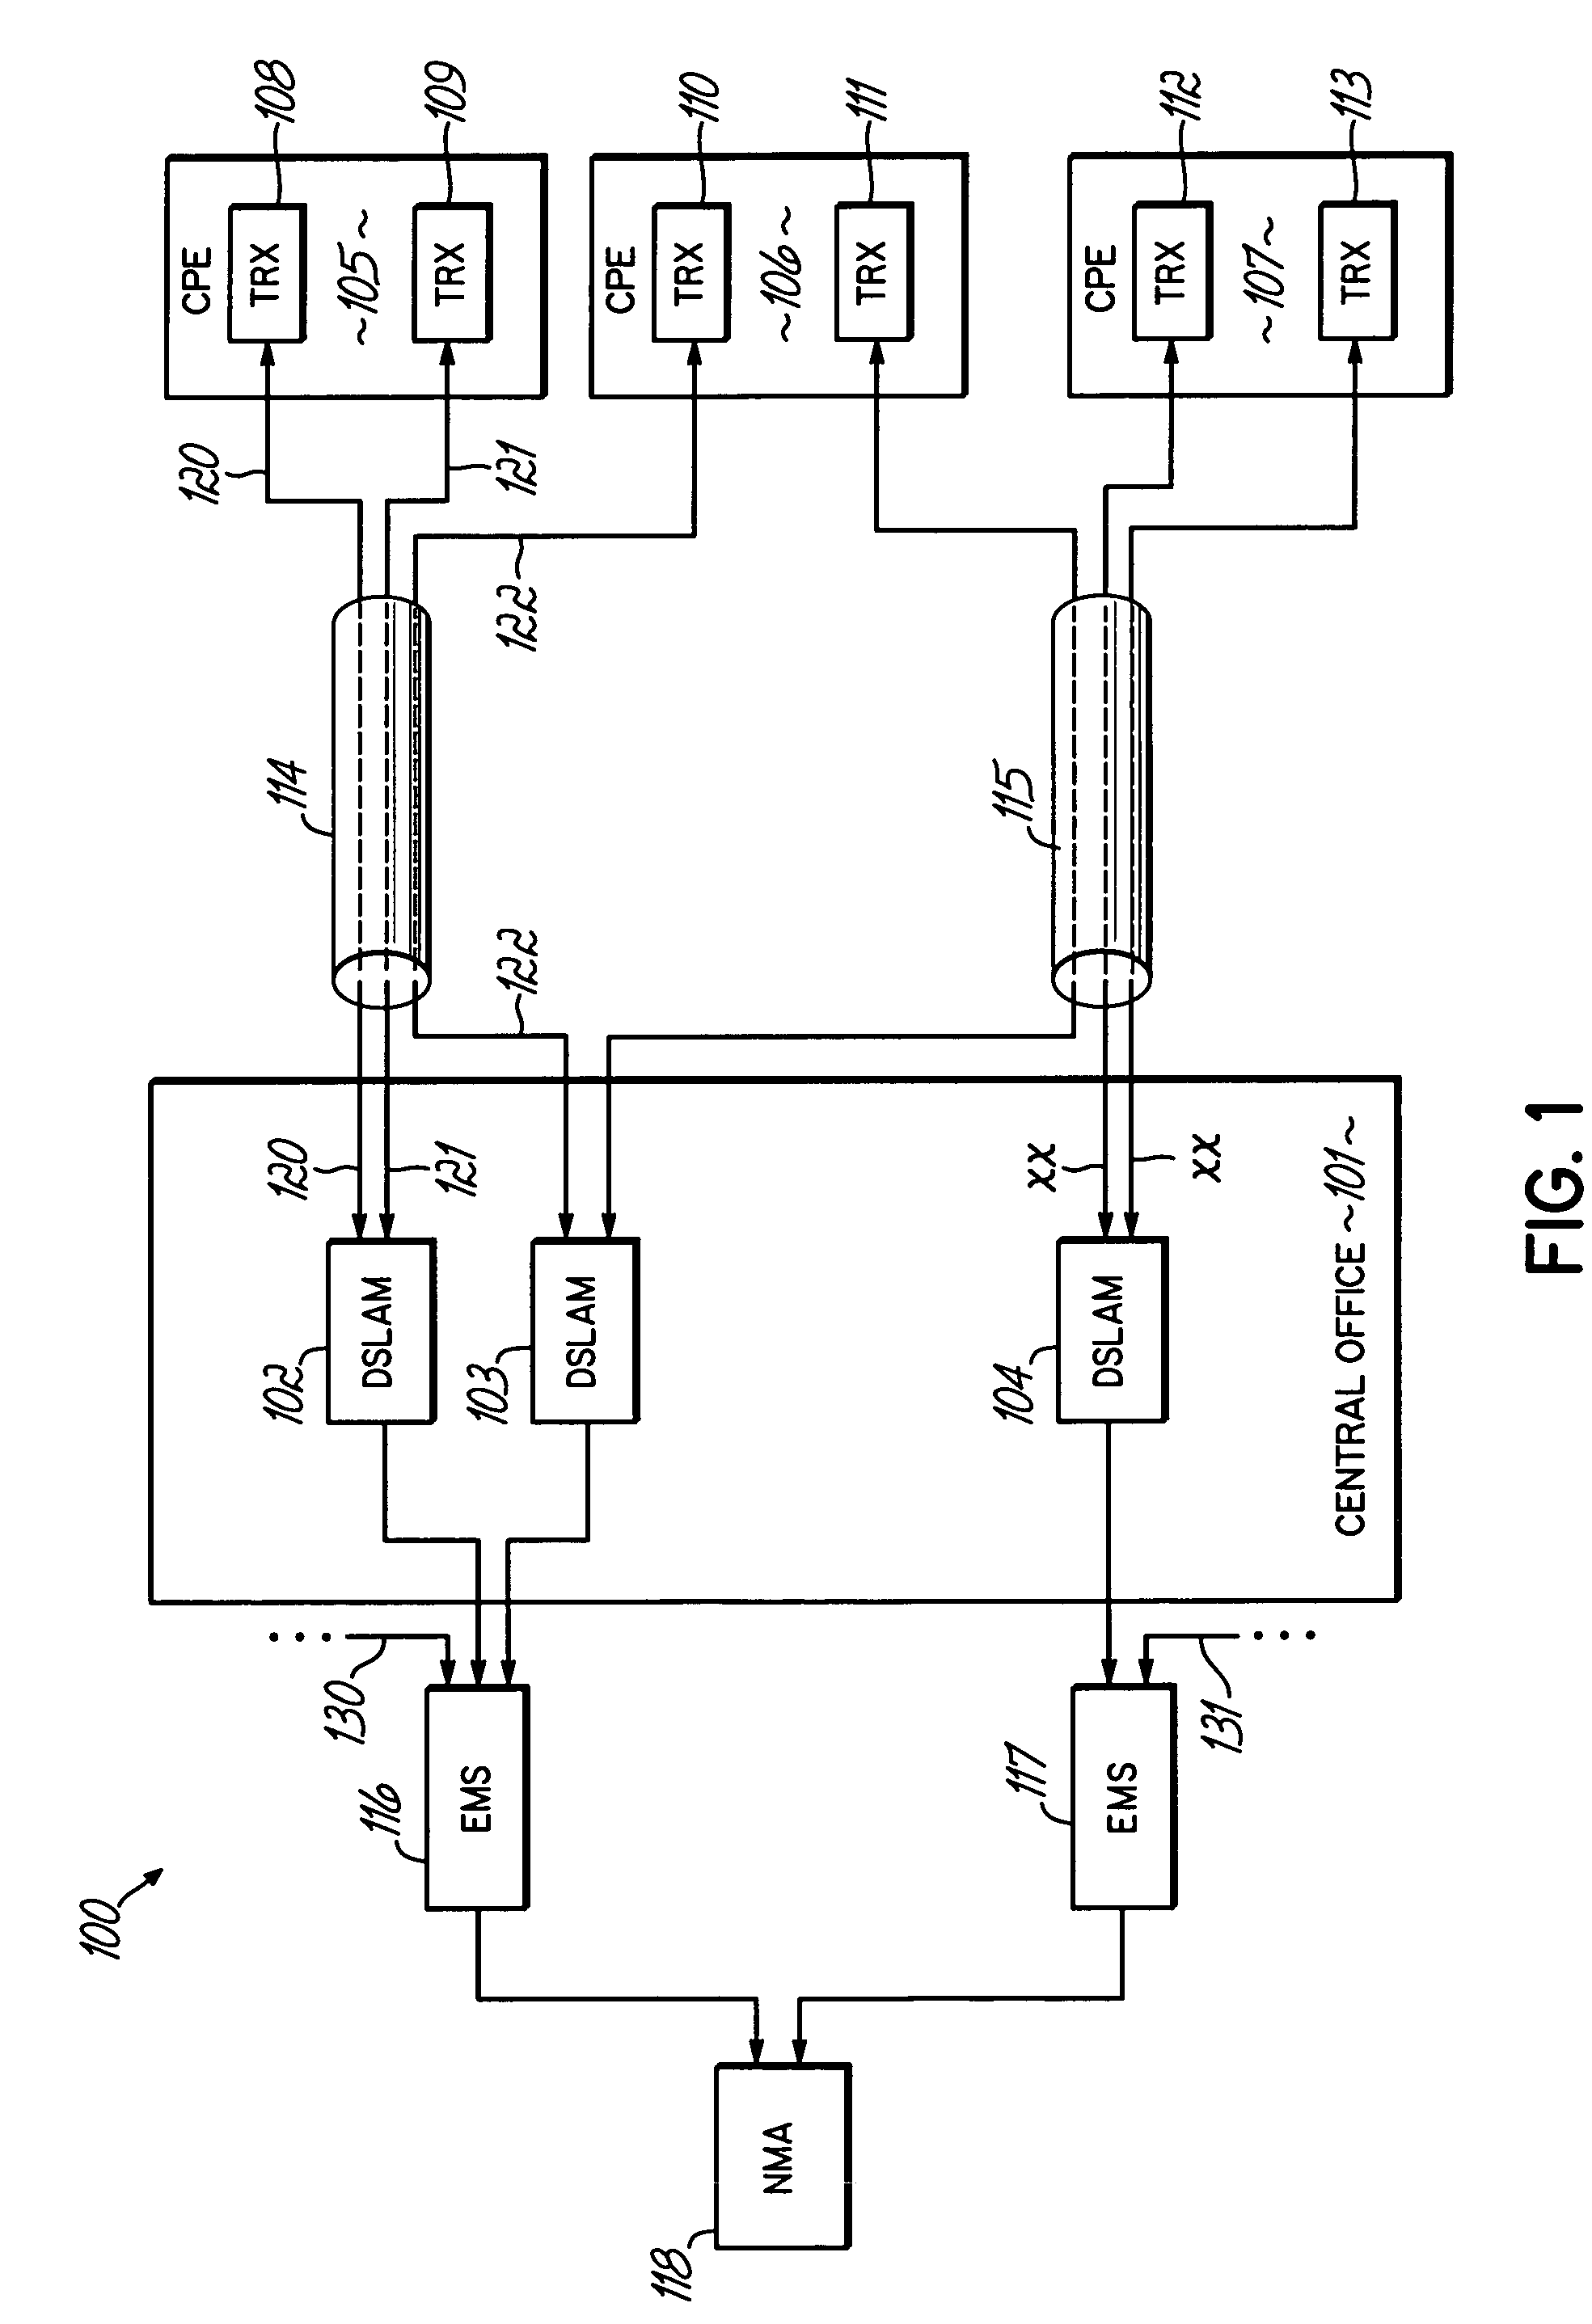 Method and apparatus for cooperative diagnosis of impairments and mitigation of disturbers in communication systems